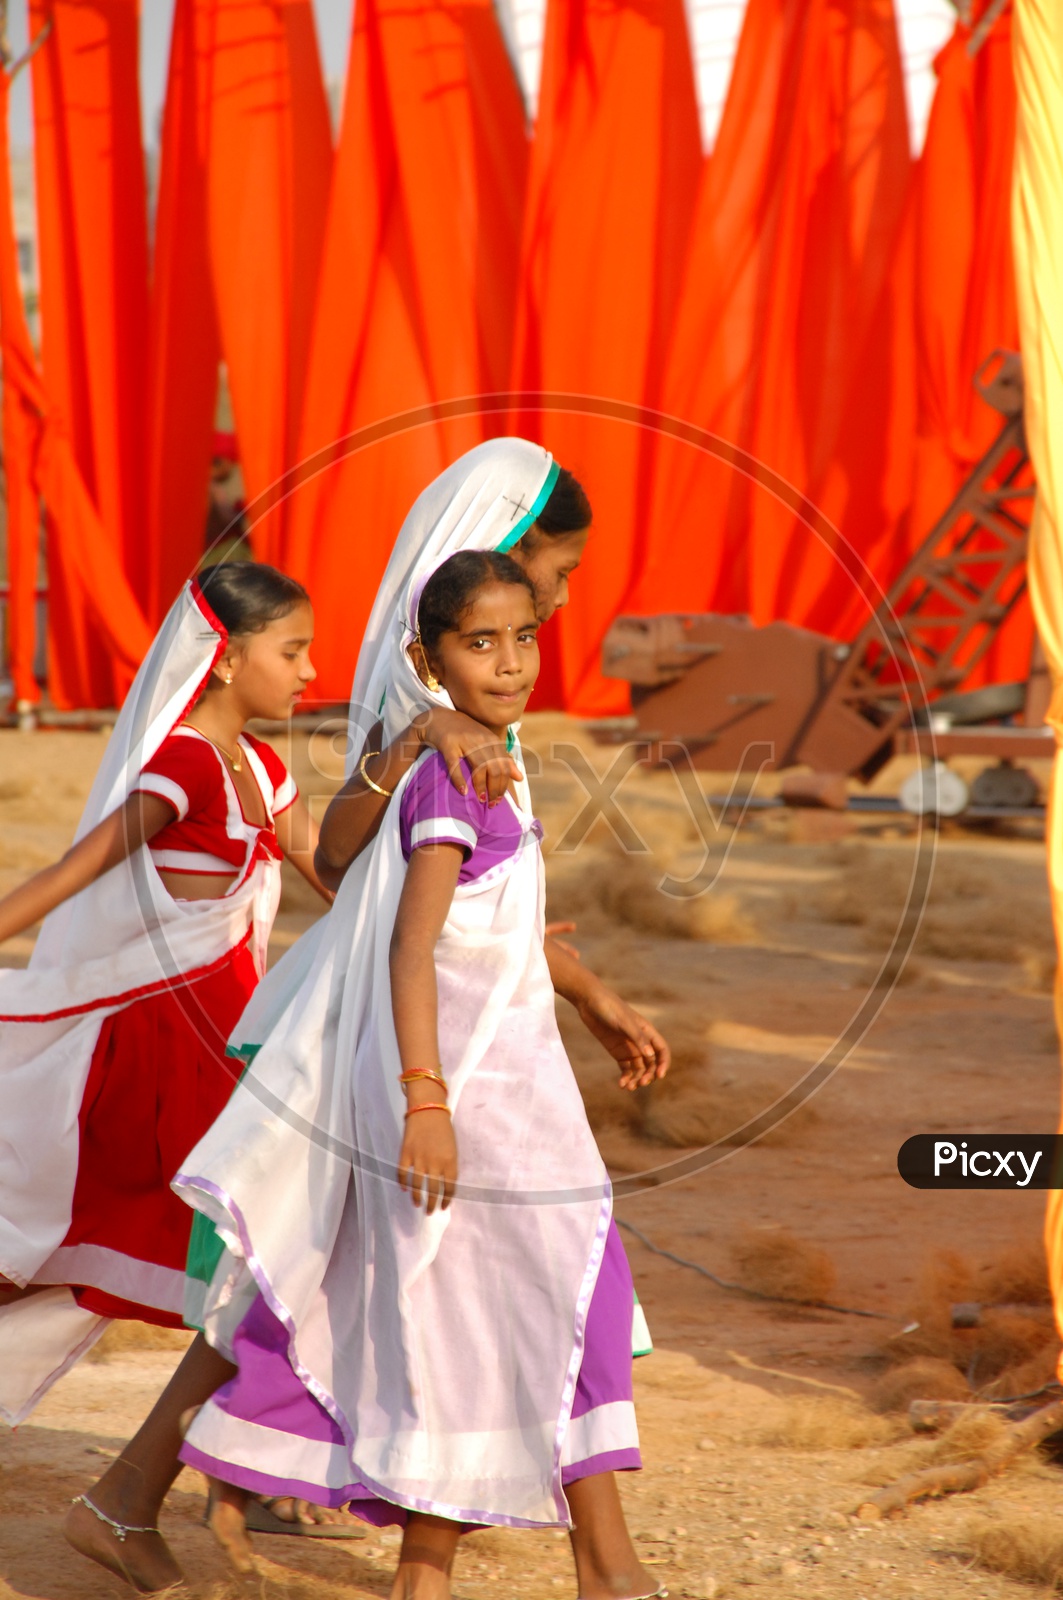 Indian Children in Getup For a Song Shooting in a movie